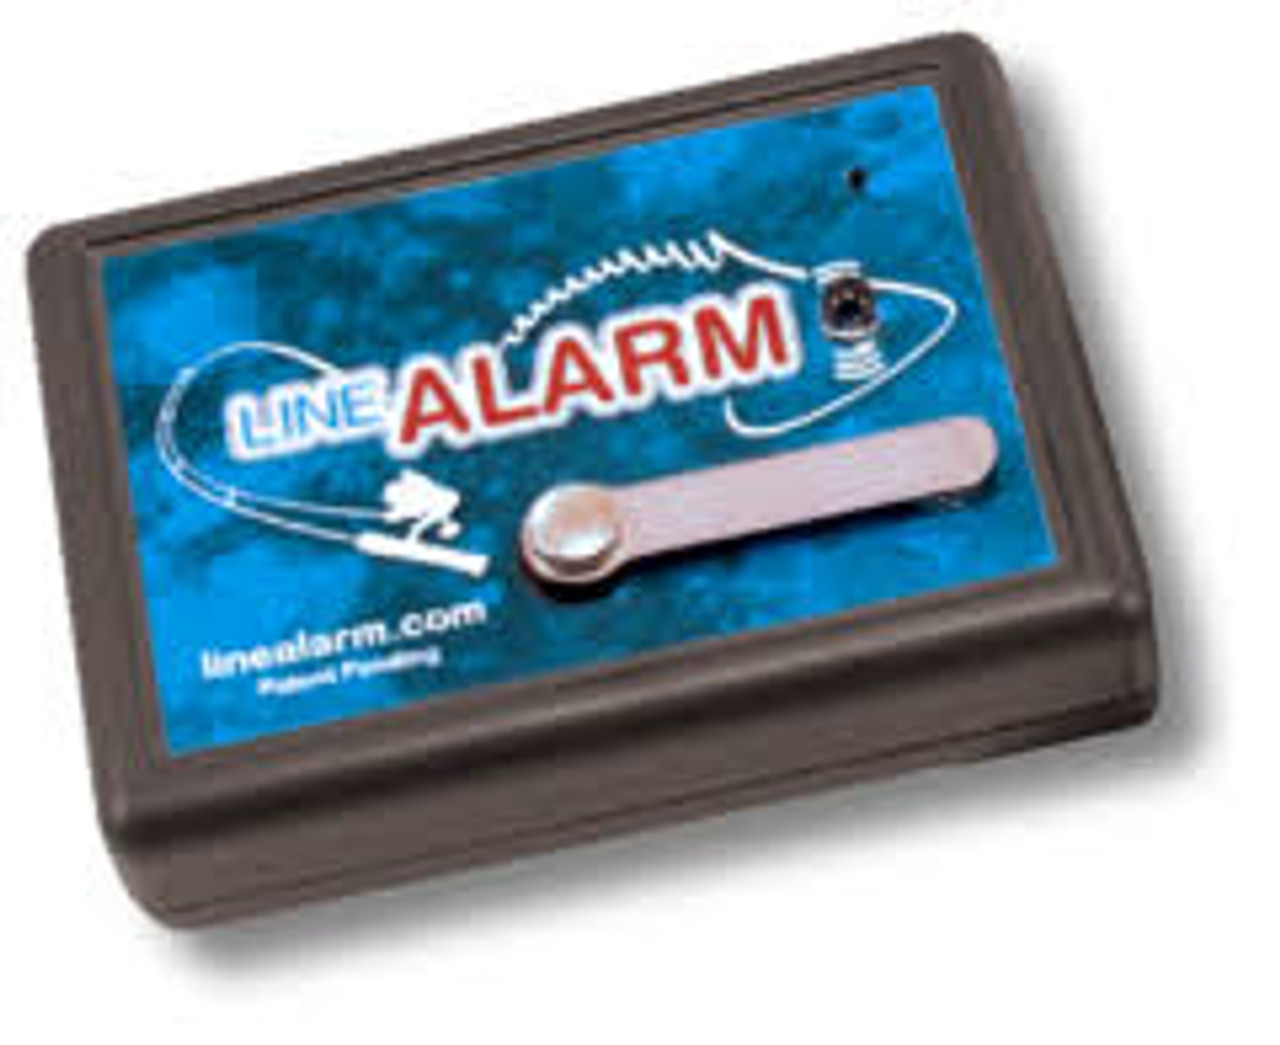 Battery operated Fish Alarm System